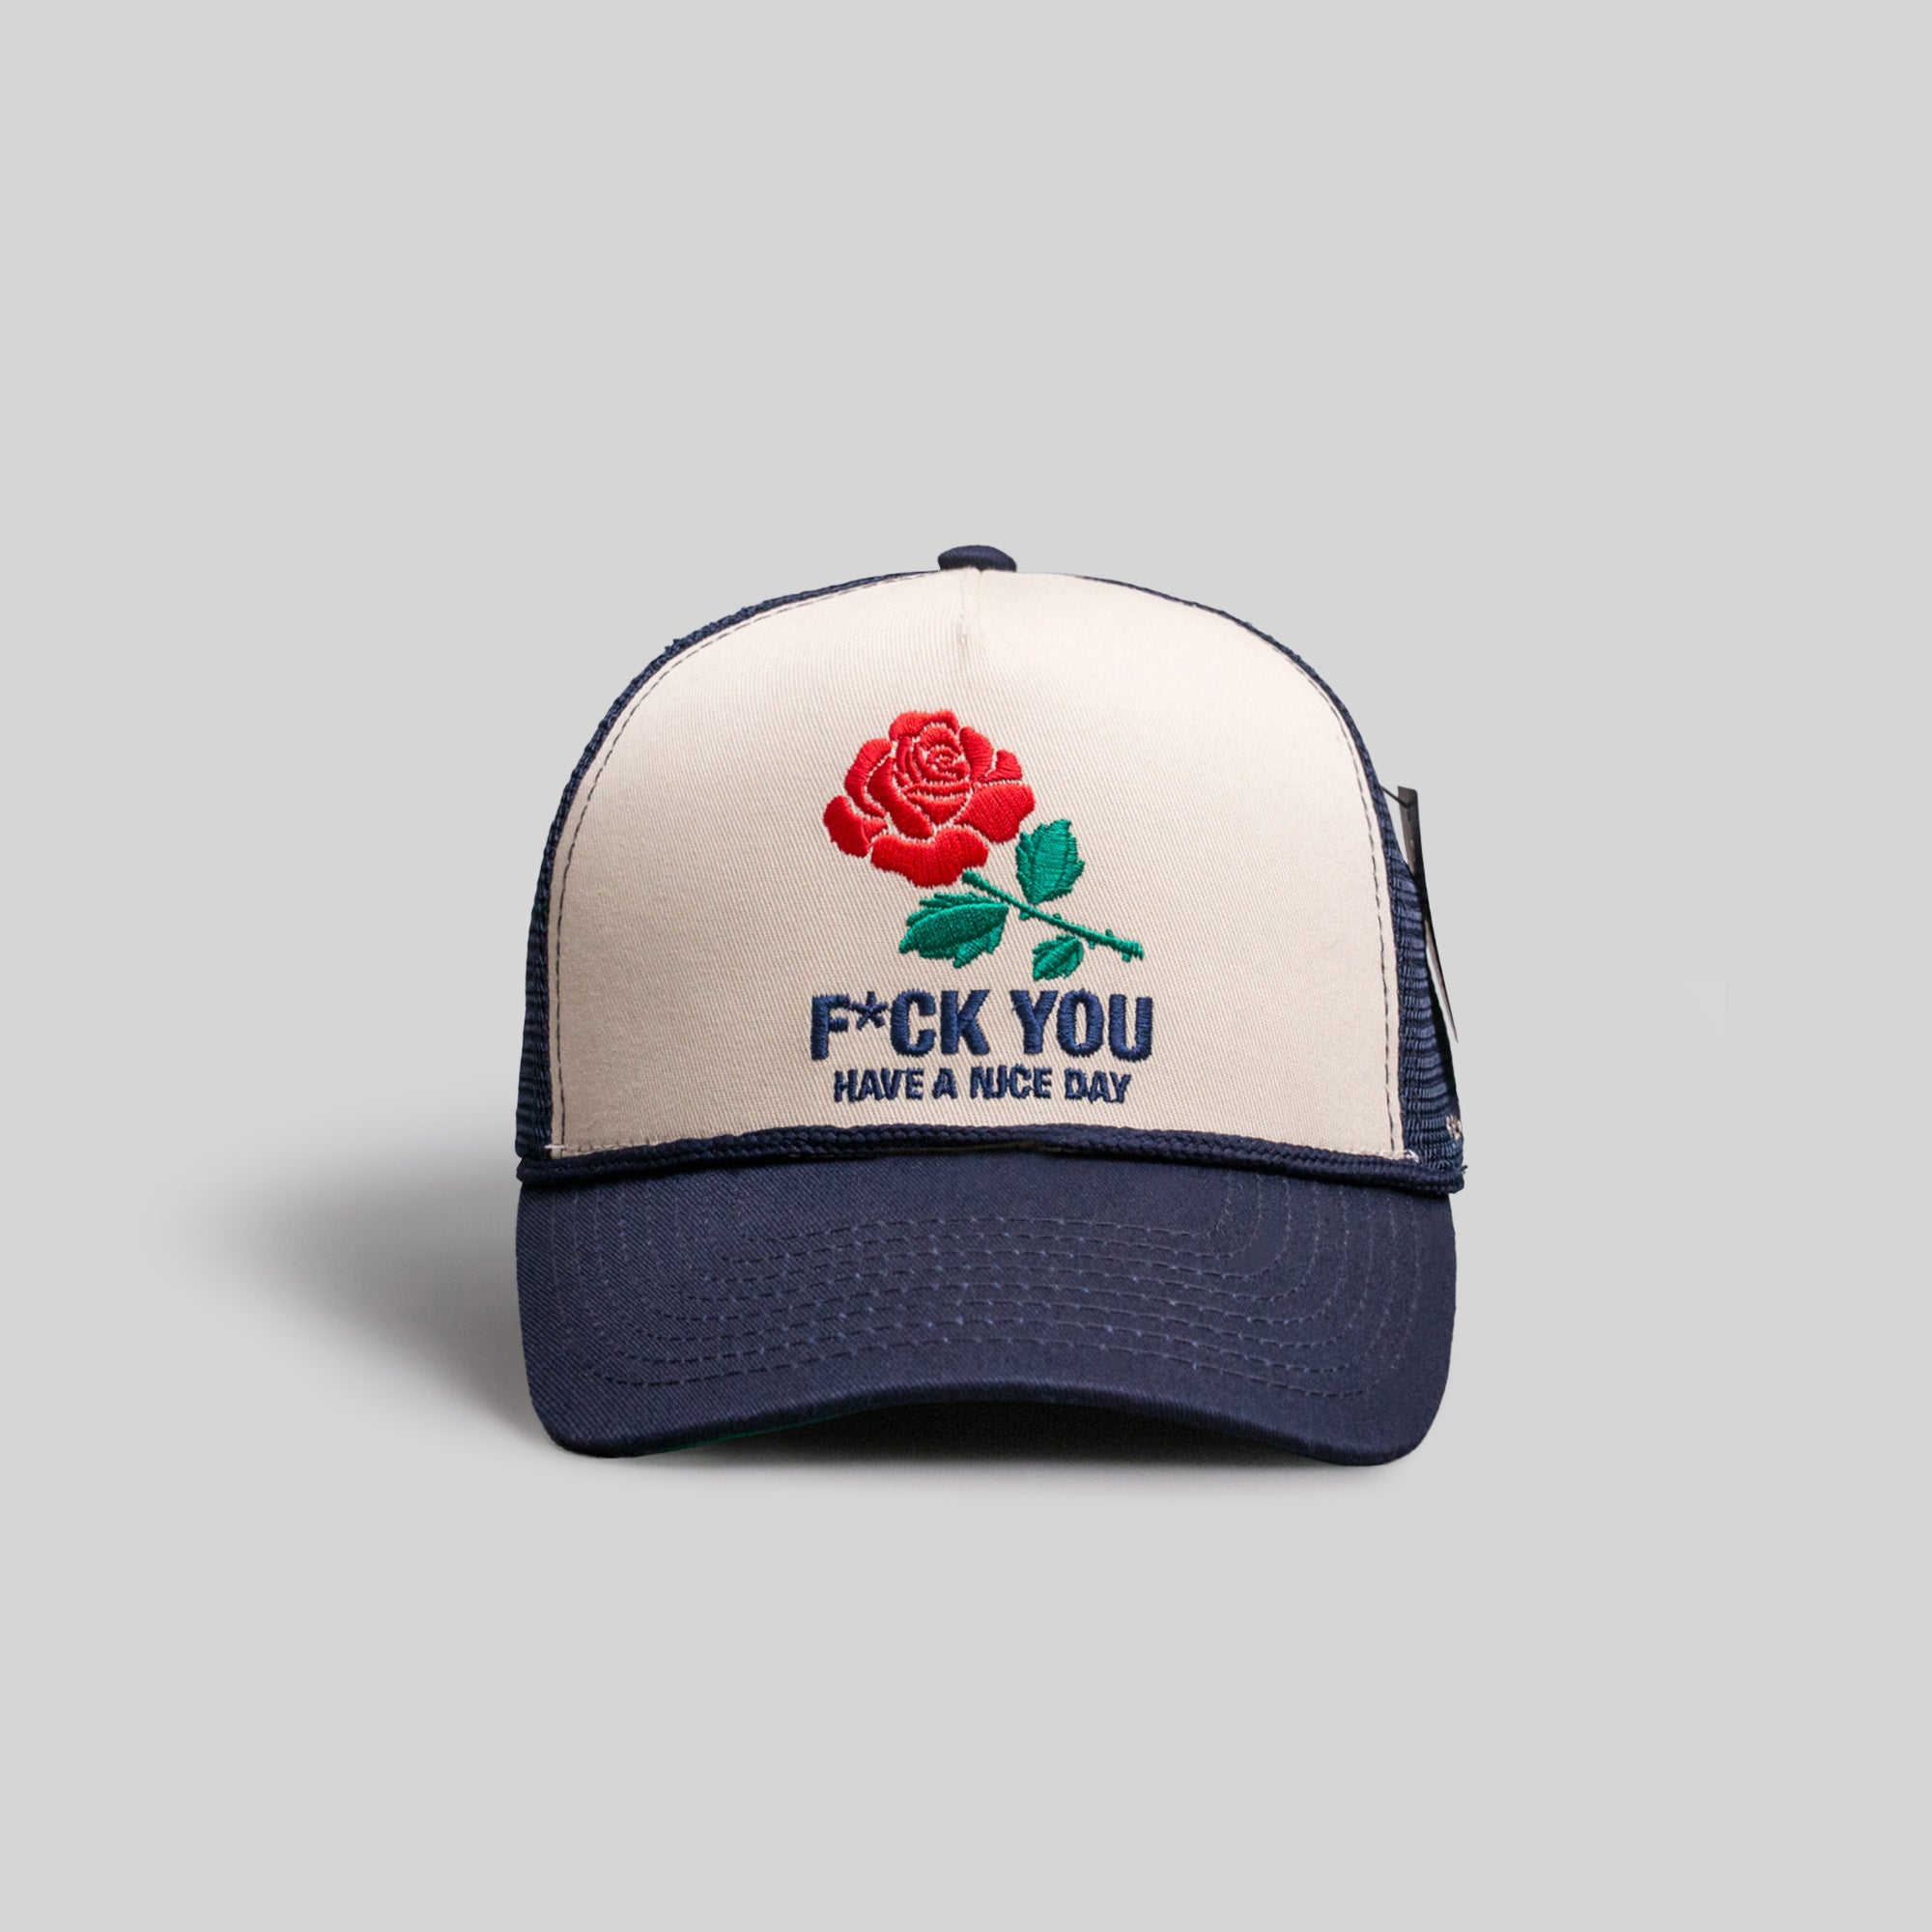 HAVE A NICE DAY TWO TONE TRUCKER HAT